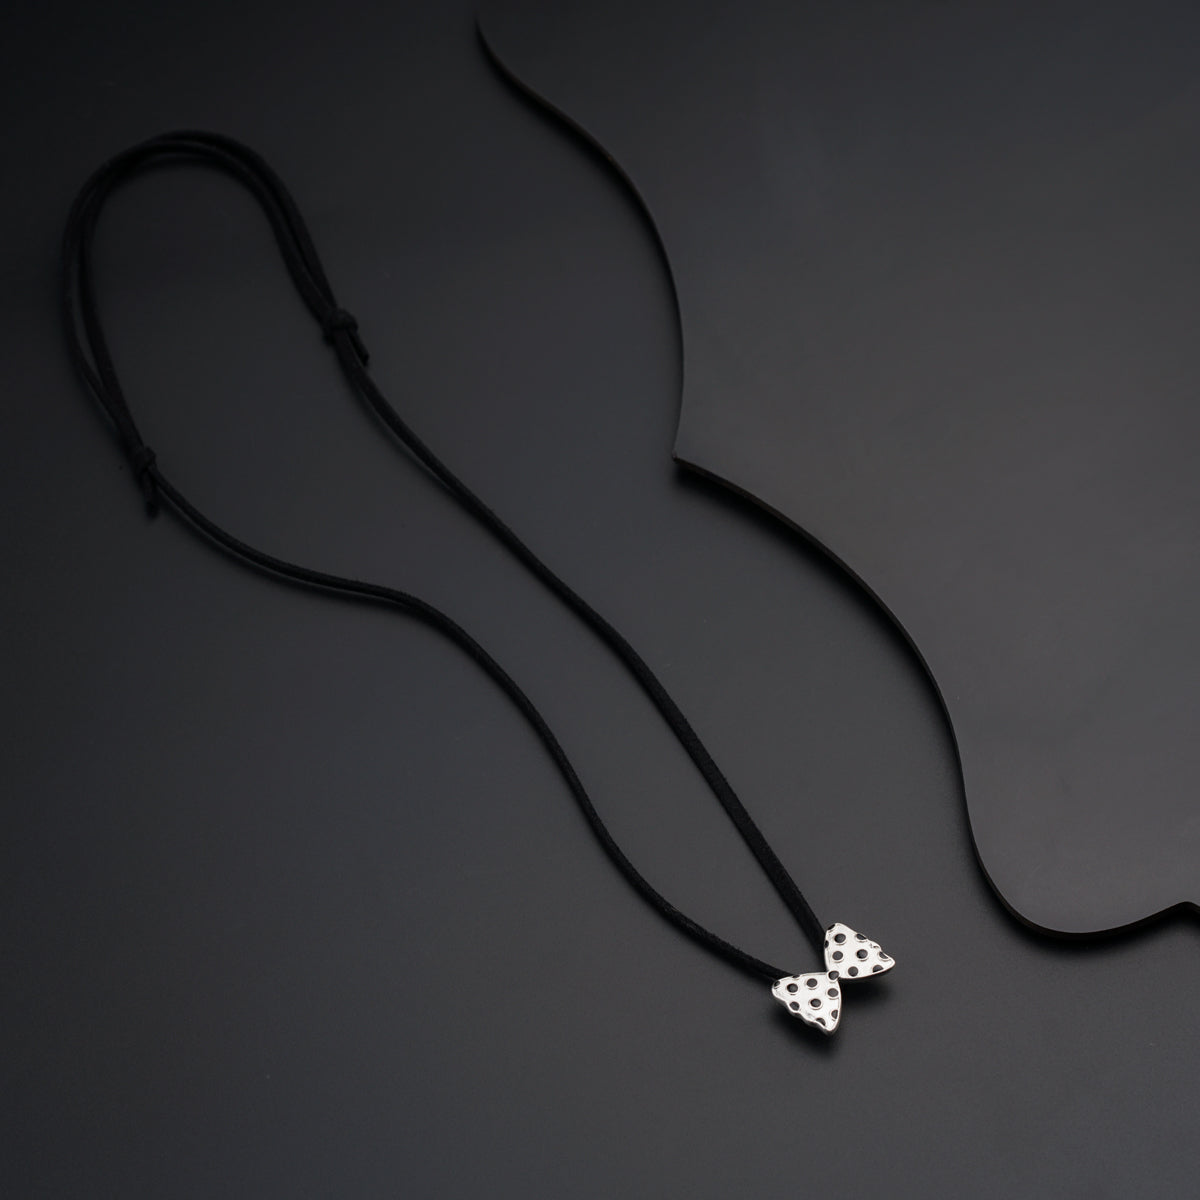 a black cord with a white flower on it